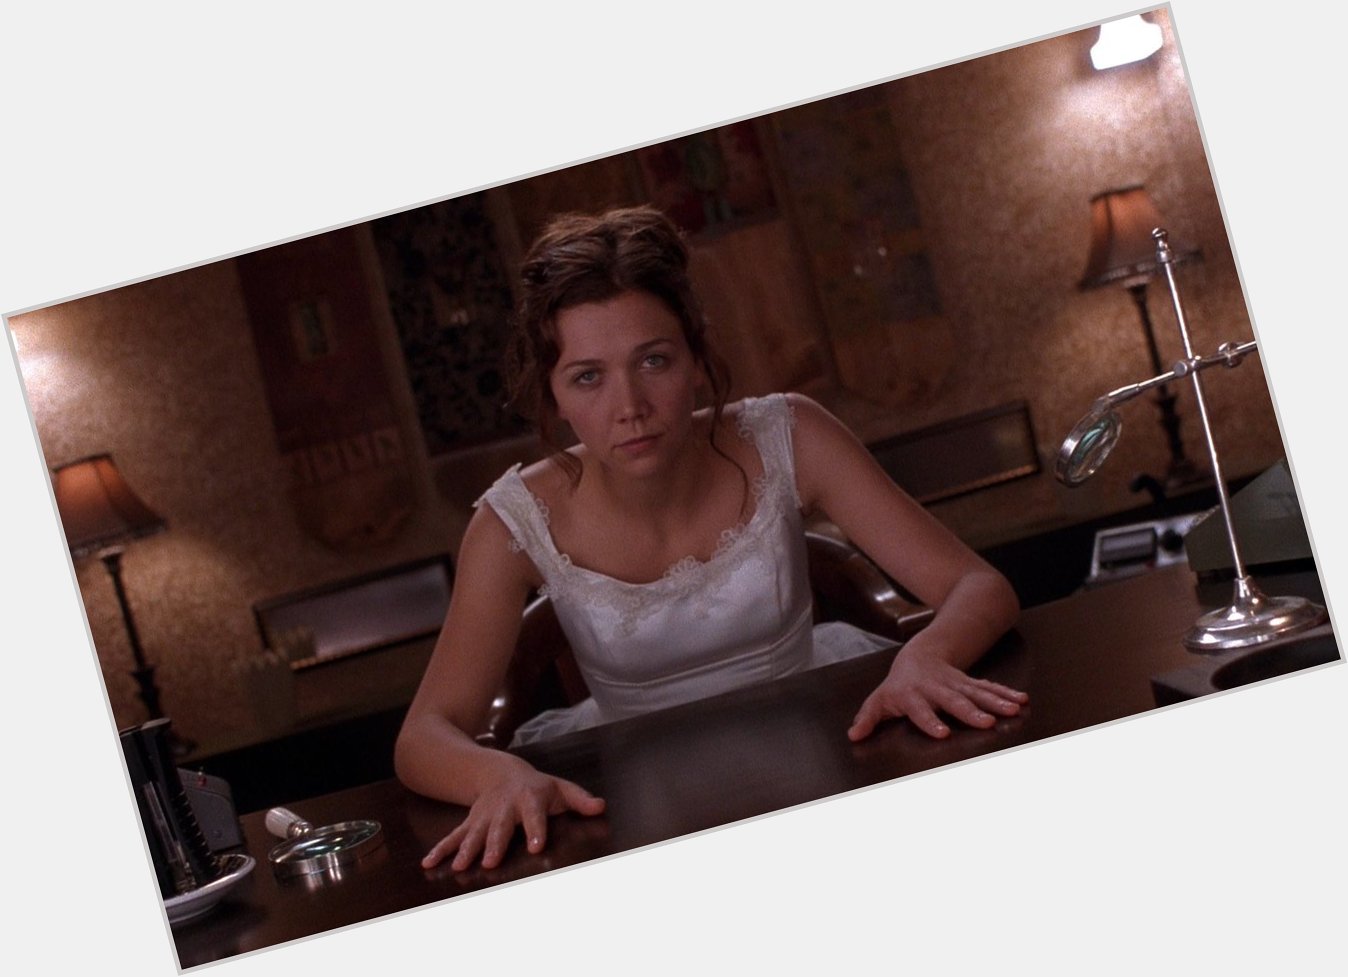 Happy birthday Maggie Gyllenhaal!! It must be so cool to come from a family of film makers!
.
. 